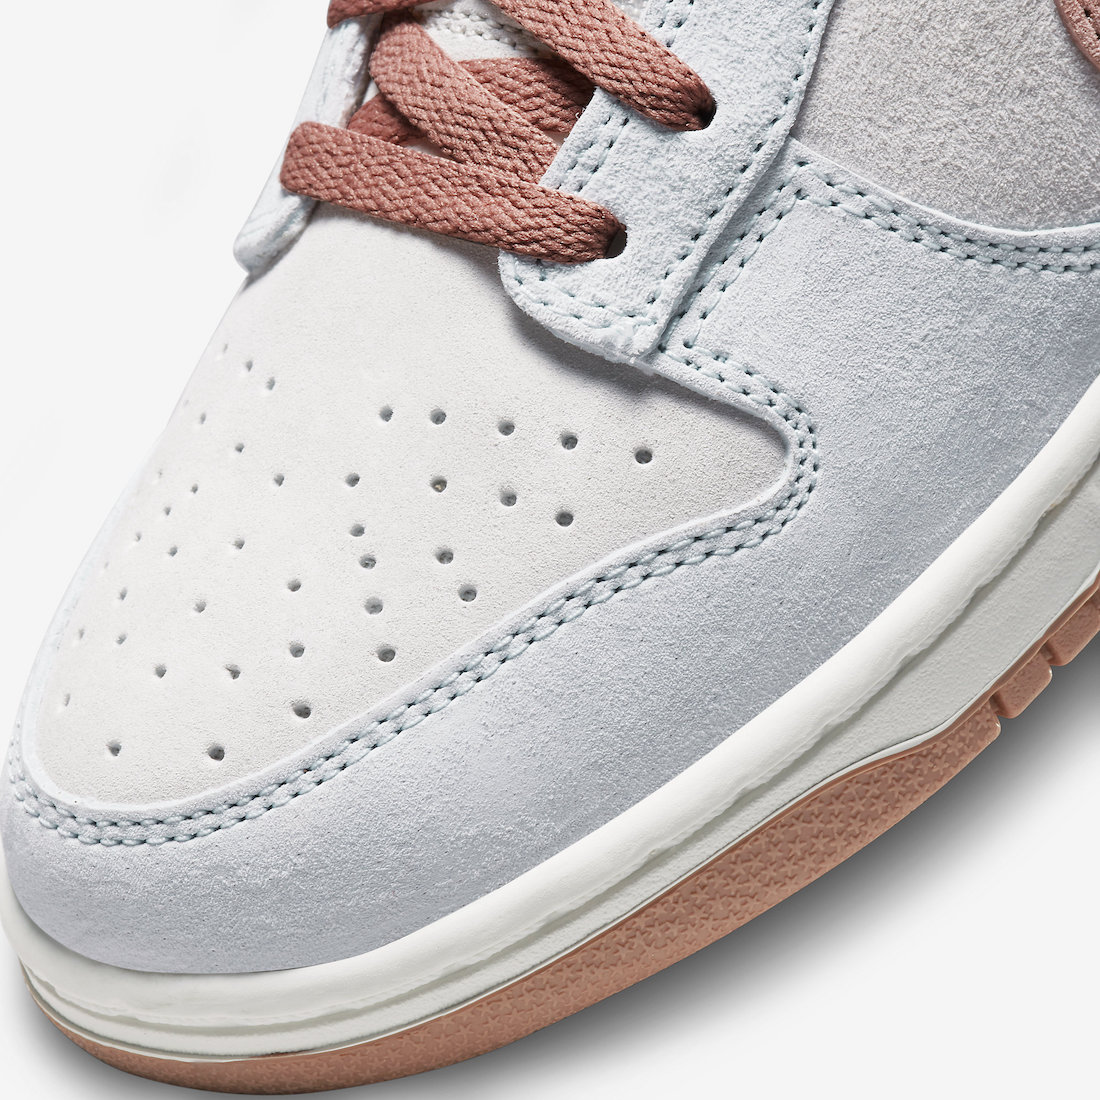 Nike-Dunk-Low-Fossil-Rose-DH7577-001-Release-Date-6